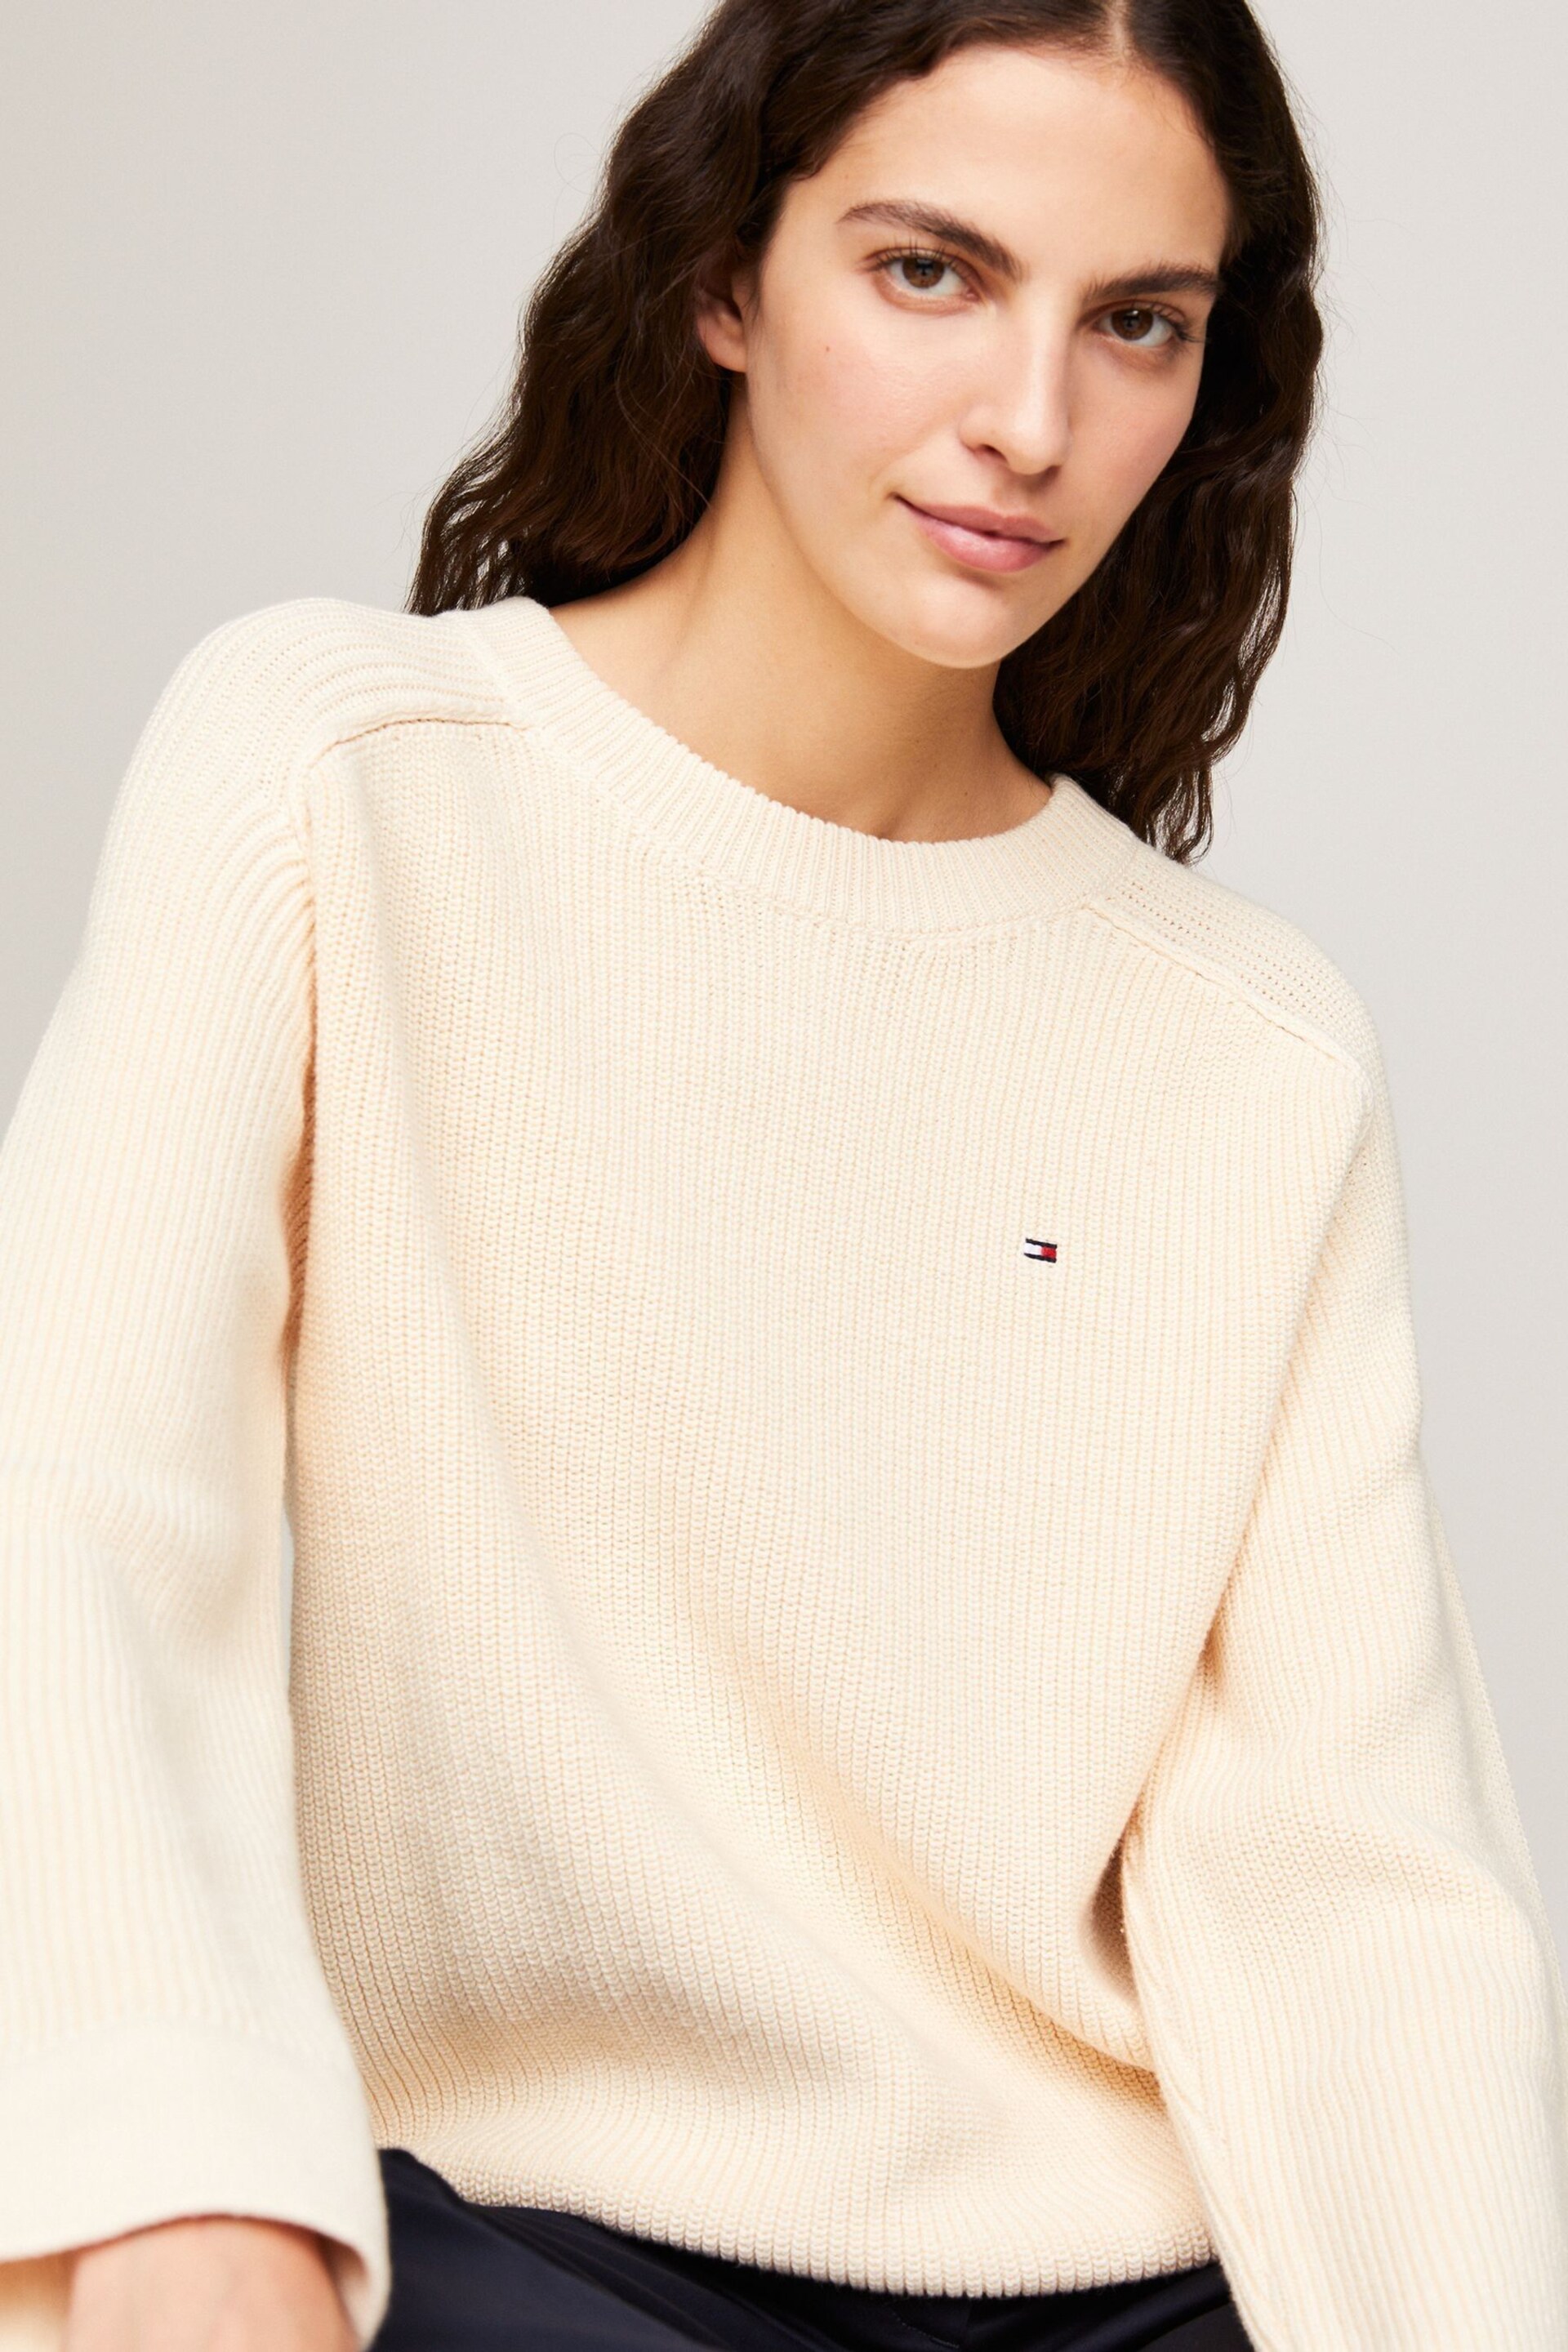 Tommy Hilfiger Cream Knit Sweater - Image 4 of 7